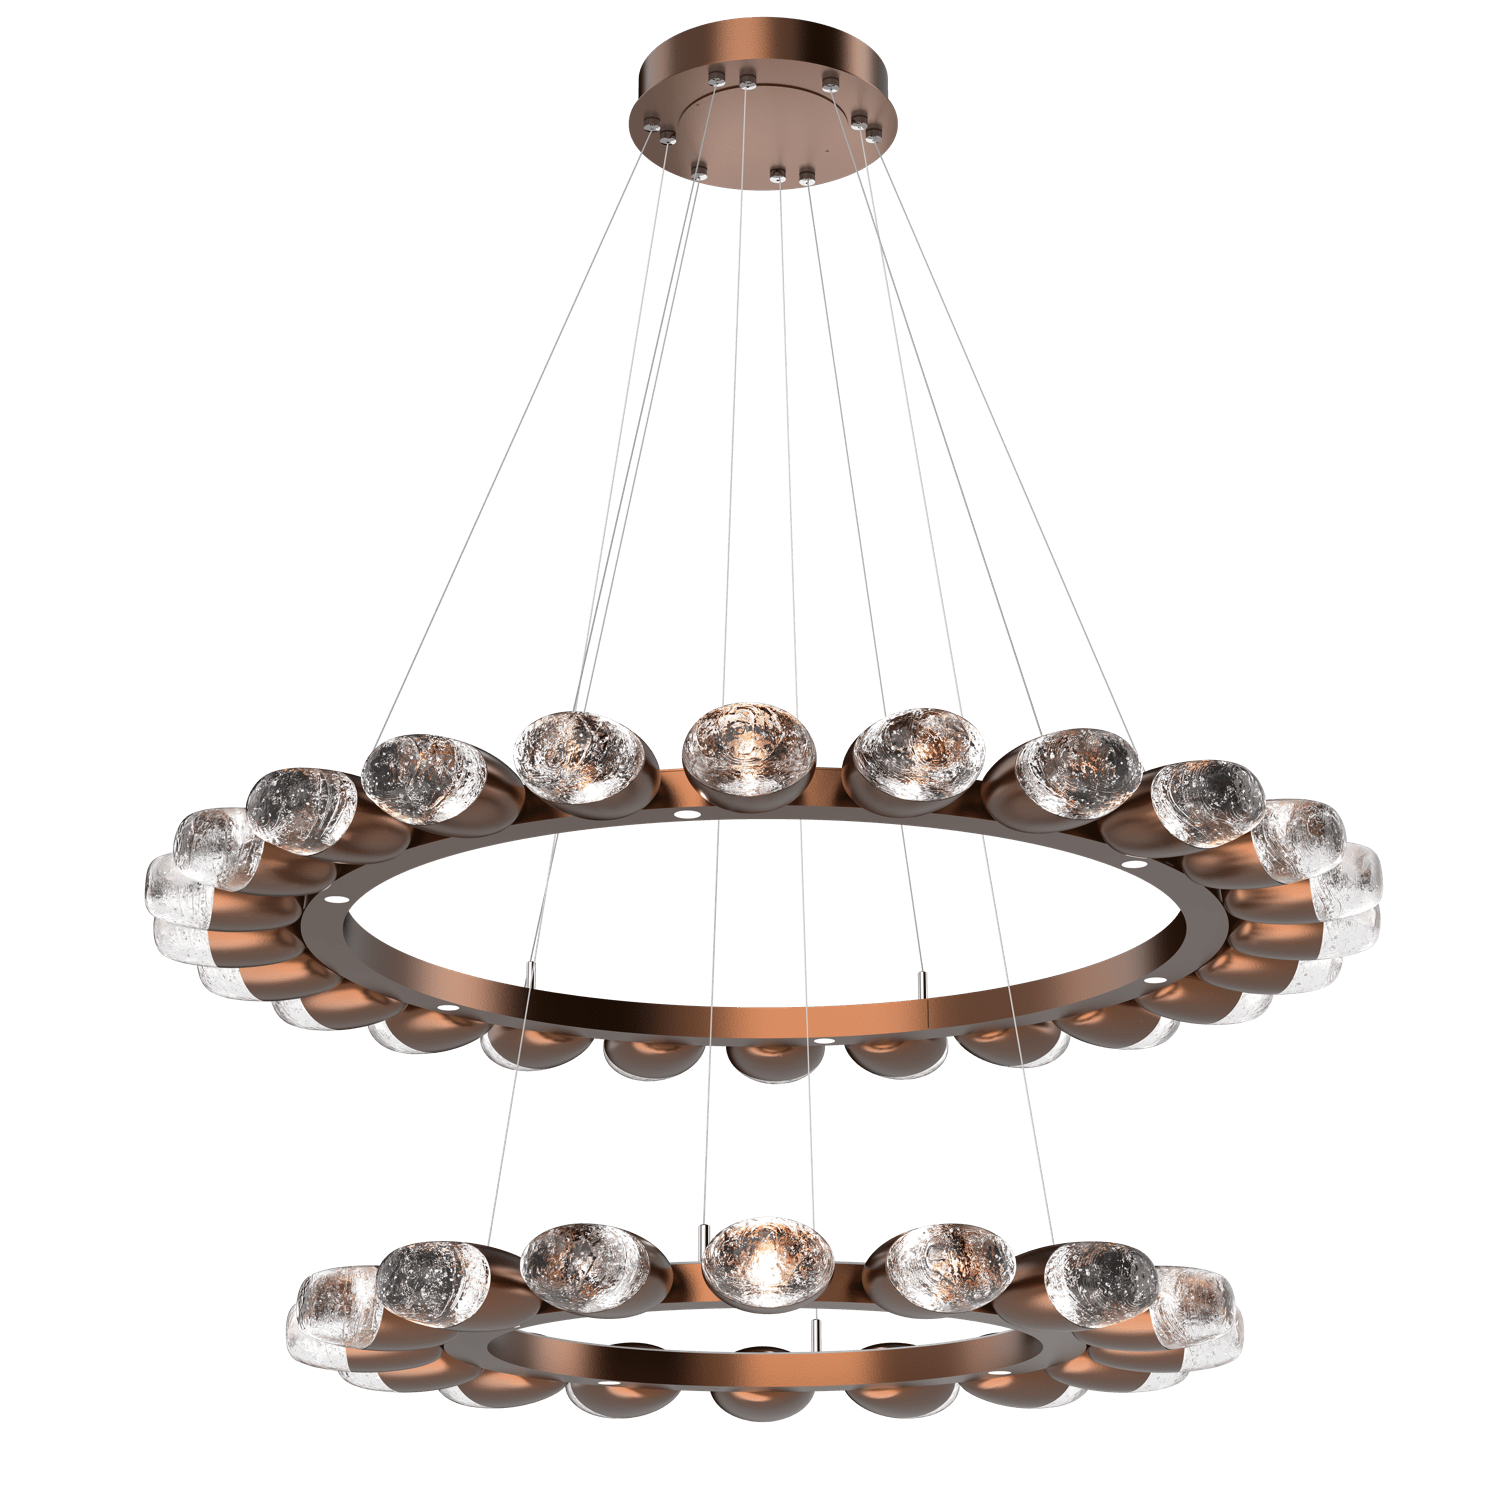 CHB0079-2T-BB-Hammerton-Studio-Pebble-48-inch-two-tier-radial-ring-chandelier-with-burnished-bronze-finish-and-clear-cast-glass-shades-and-LED-lamping